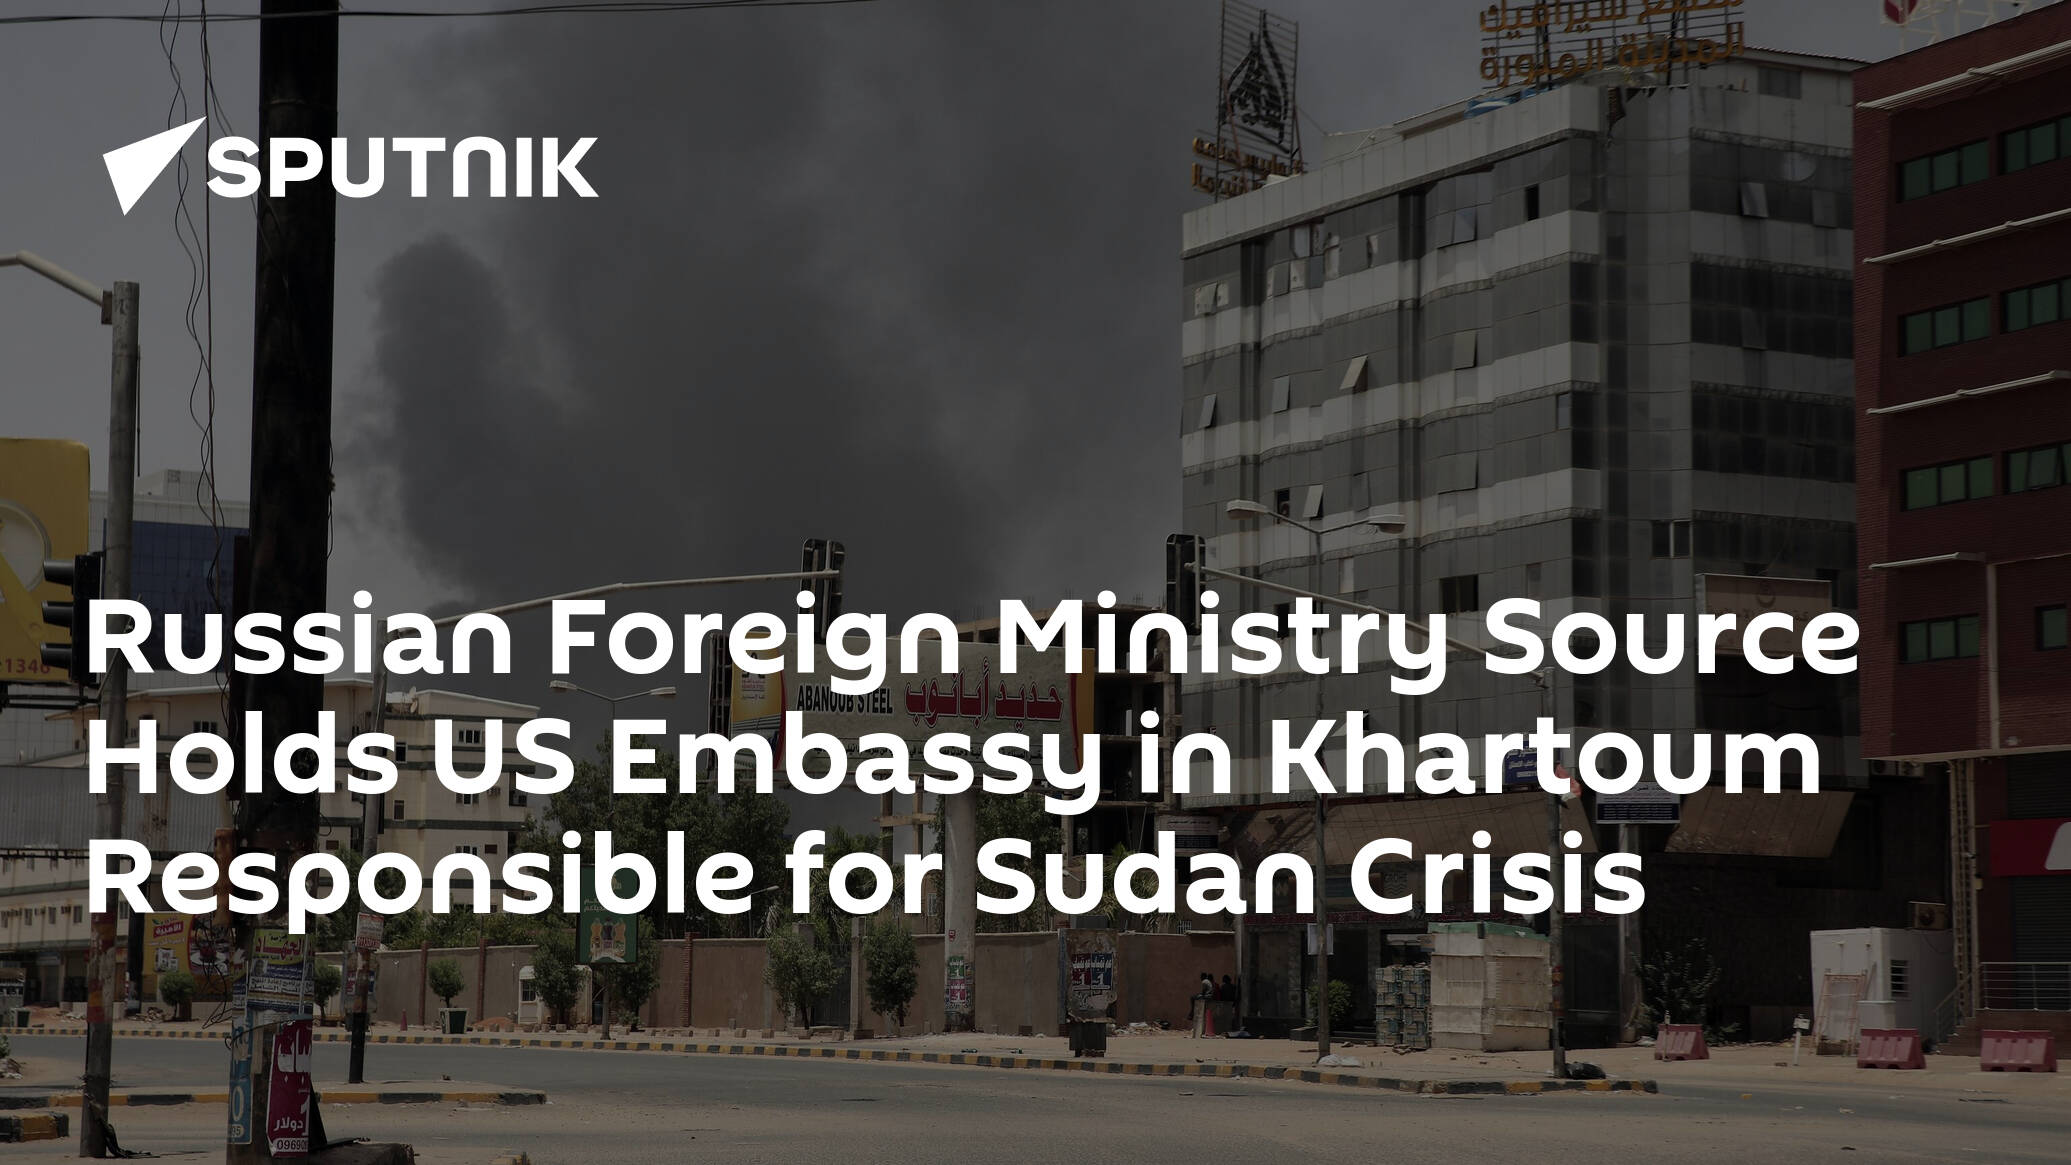 Russian Foreign Ministry Source Calls US Embassy in Khartoum Responsible for Sudan Crisis